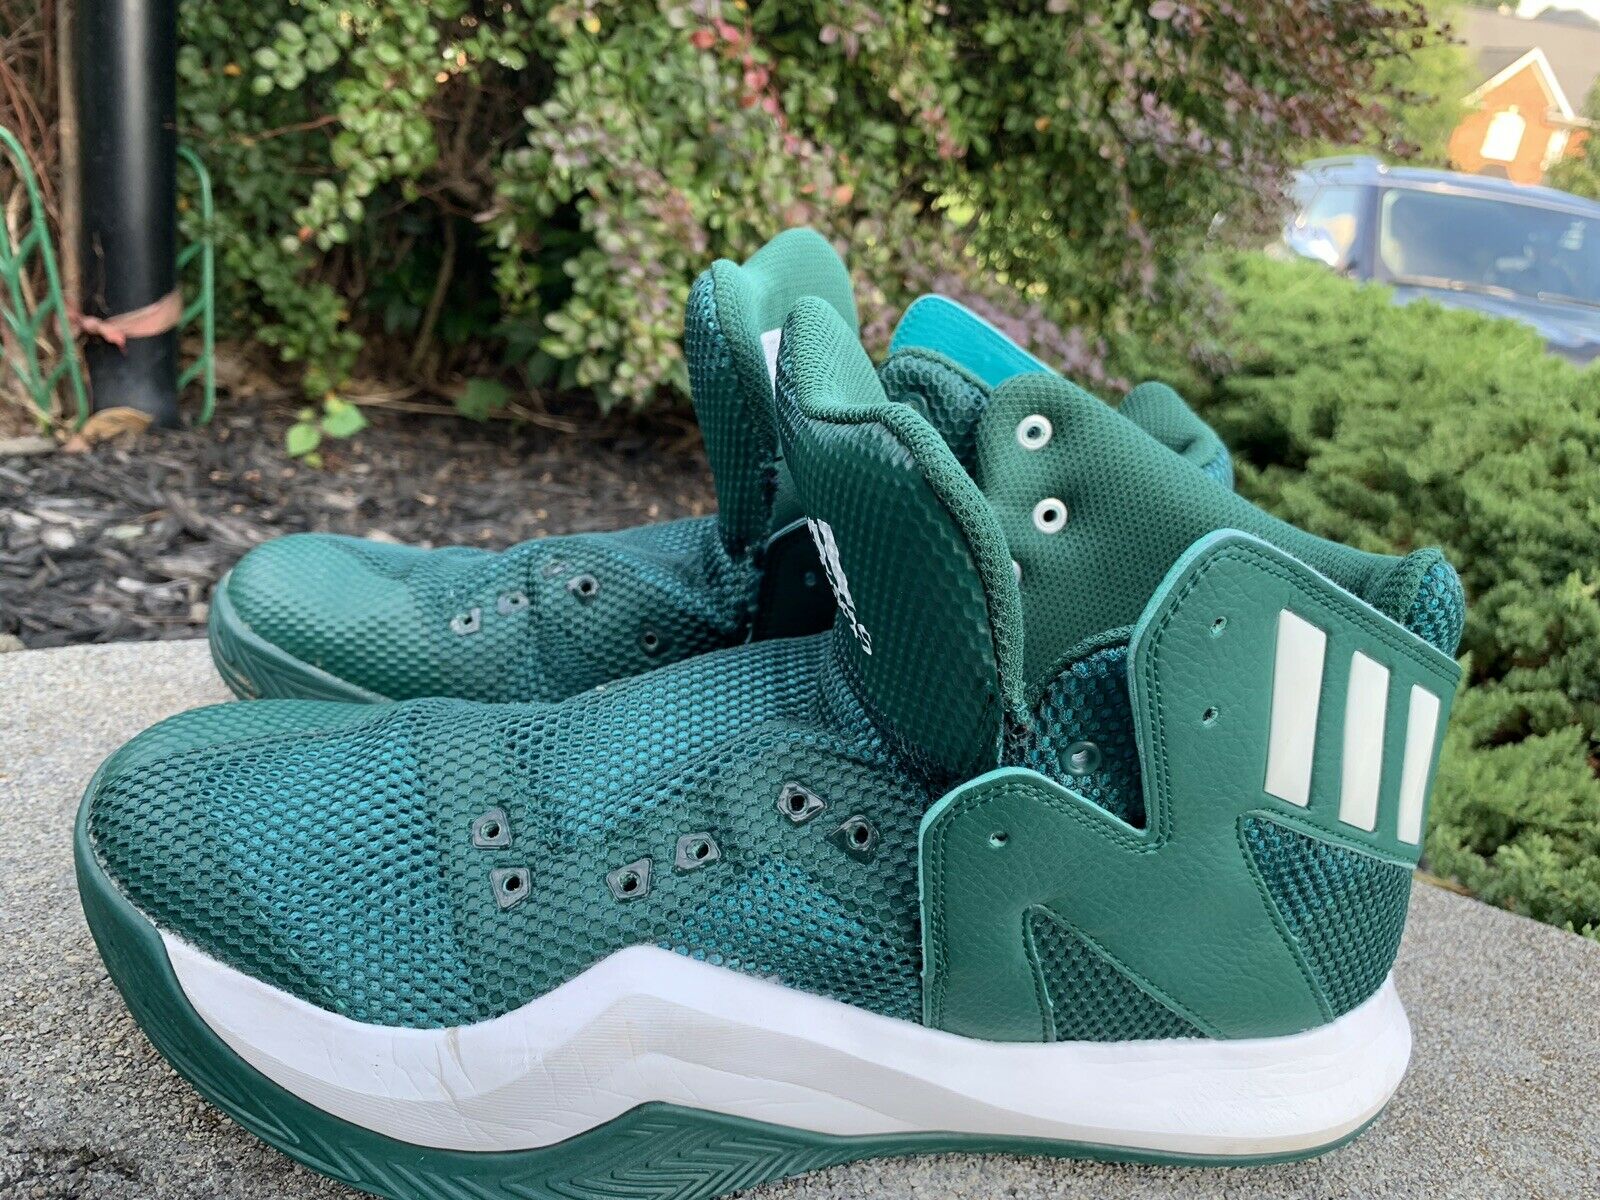 Adidas Shoes Basketball Sneakers 11.5M Green ECU no Laces